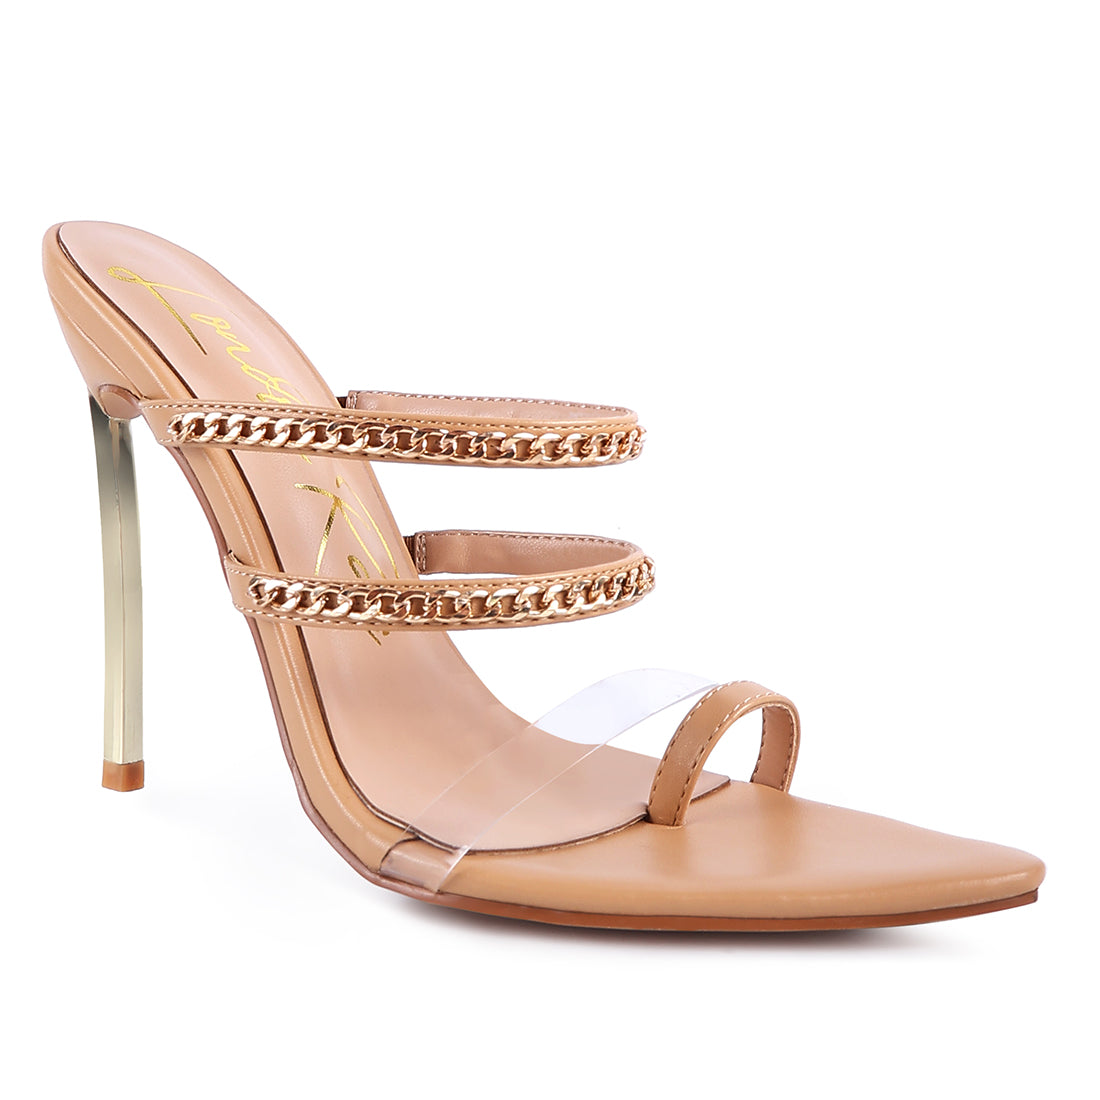 High Heeled Toe Ring Sandals in Latte